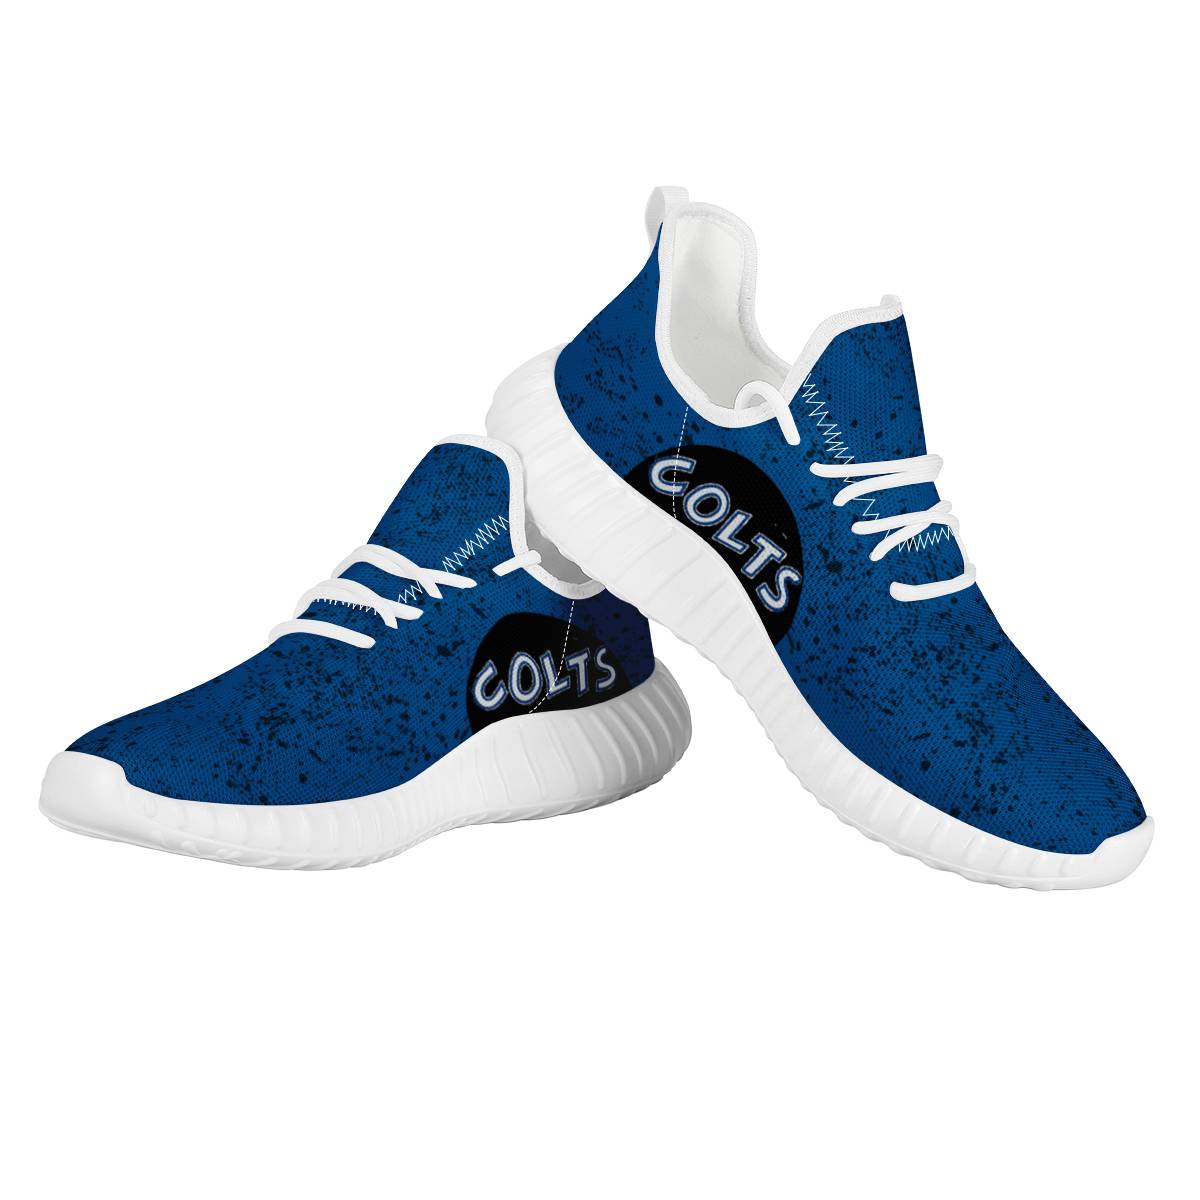 Women's Indianapolis Colts Mesh Knit Sneakers/Shoes 002